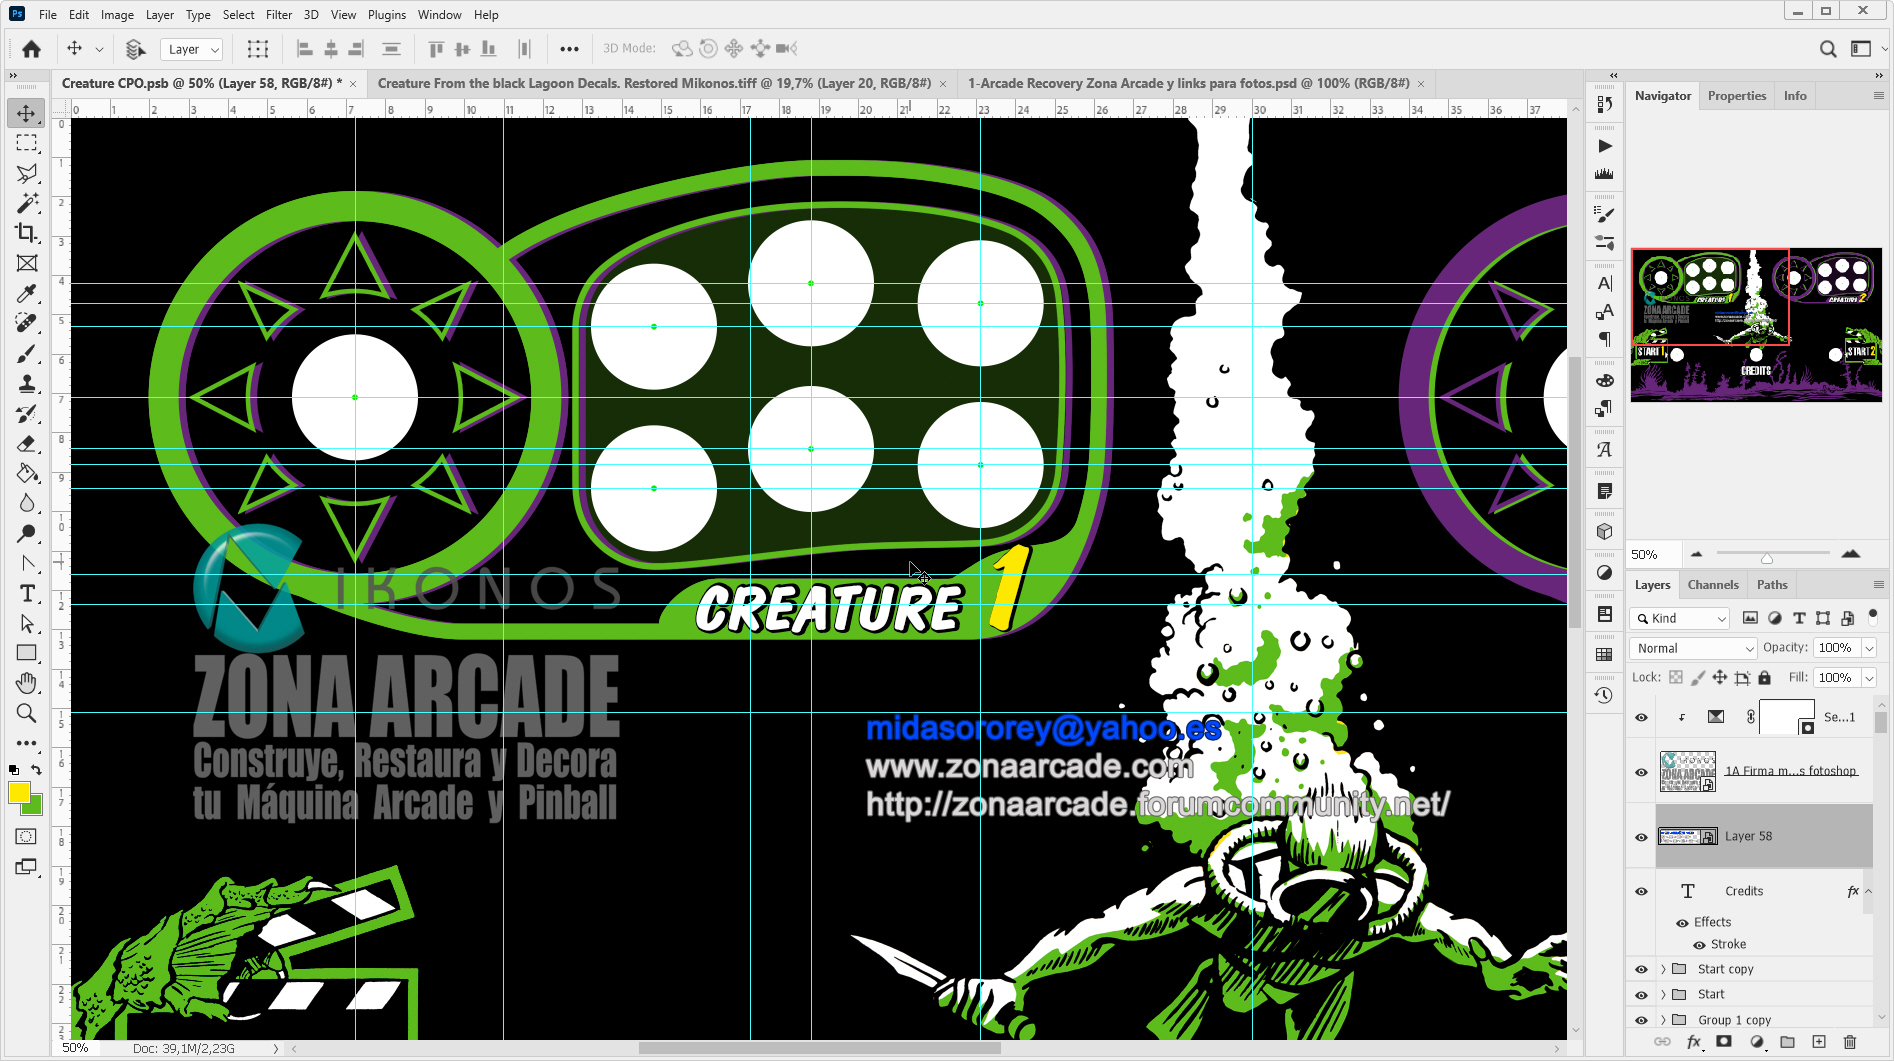 Creature-From-the-Black-Lagoon-Arcade-Cabinet-Control-Panel-Overlay-Designed-Mikonos3